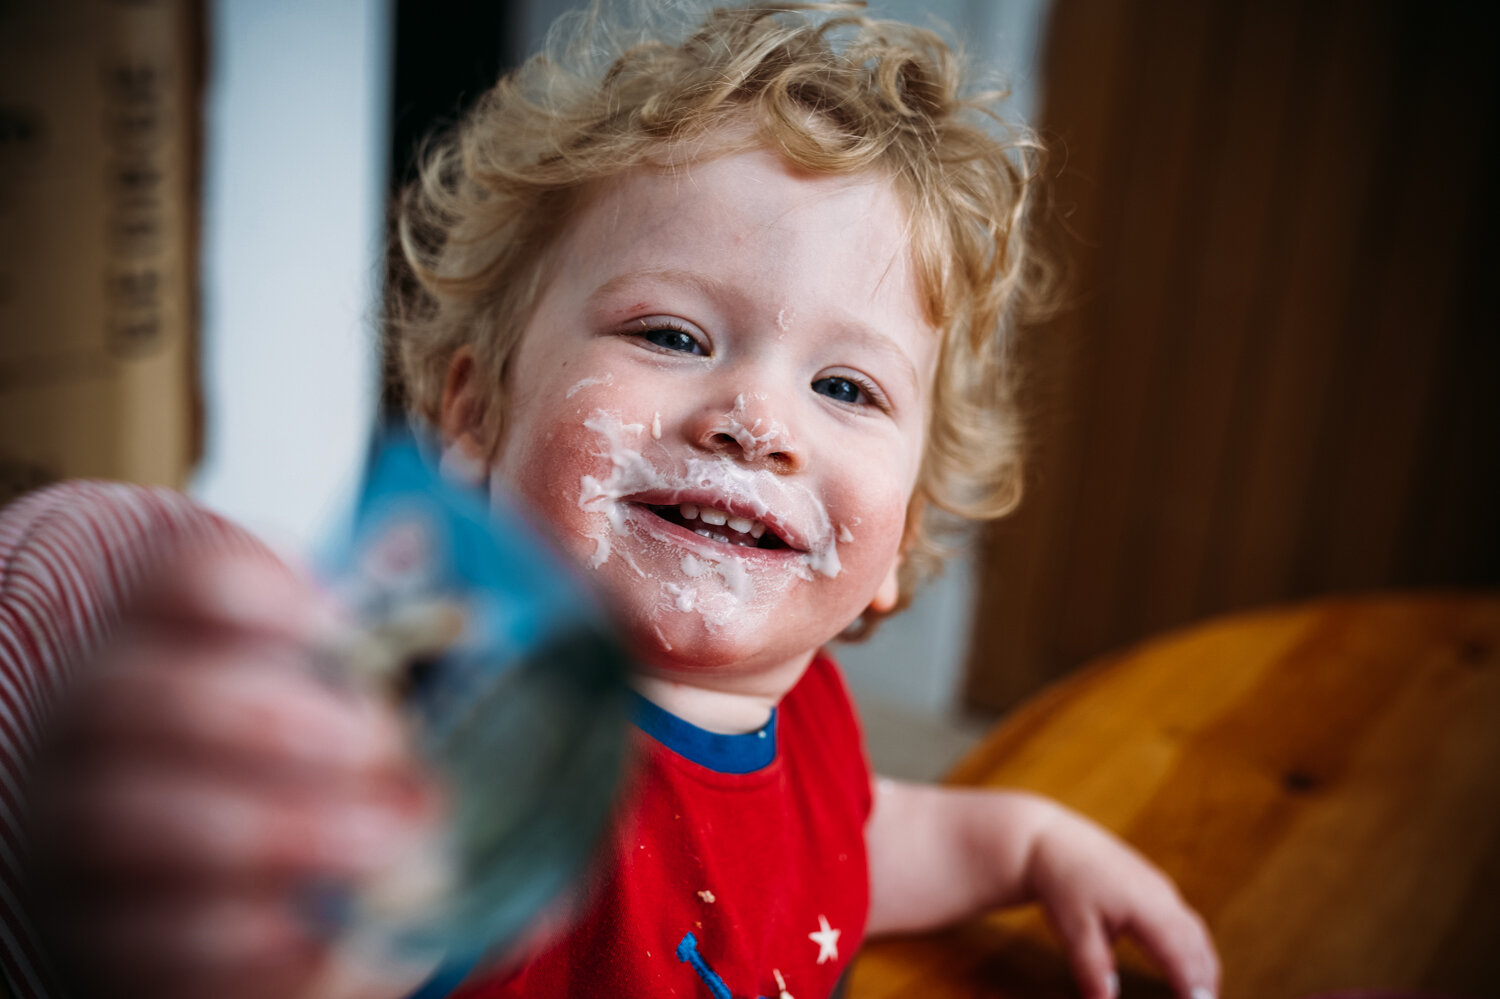  Cute toddler with curly blonde hair smiles at the camera with yoghurt round his mouth eating his breakfast during in-home session in Chew Magna, Bristol. 